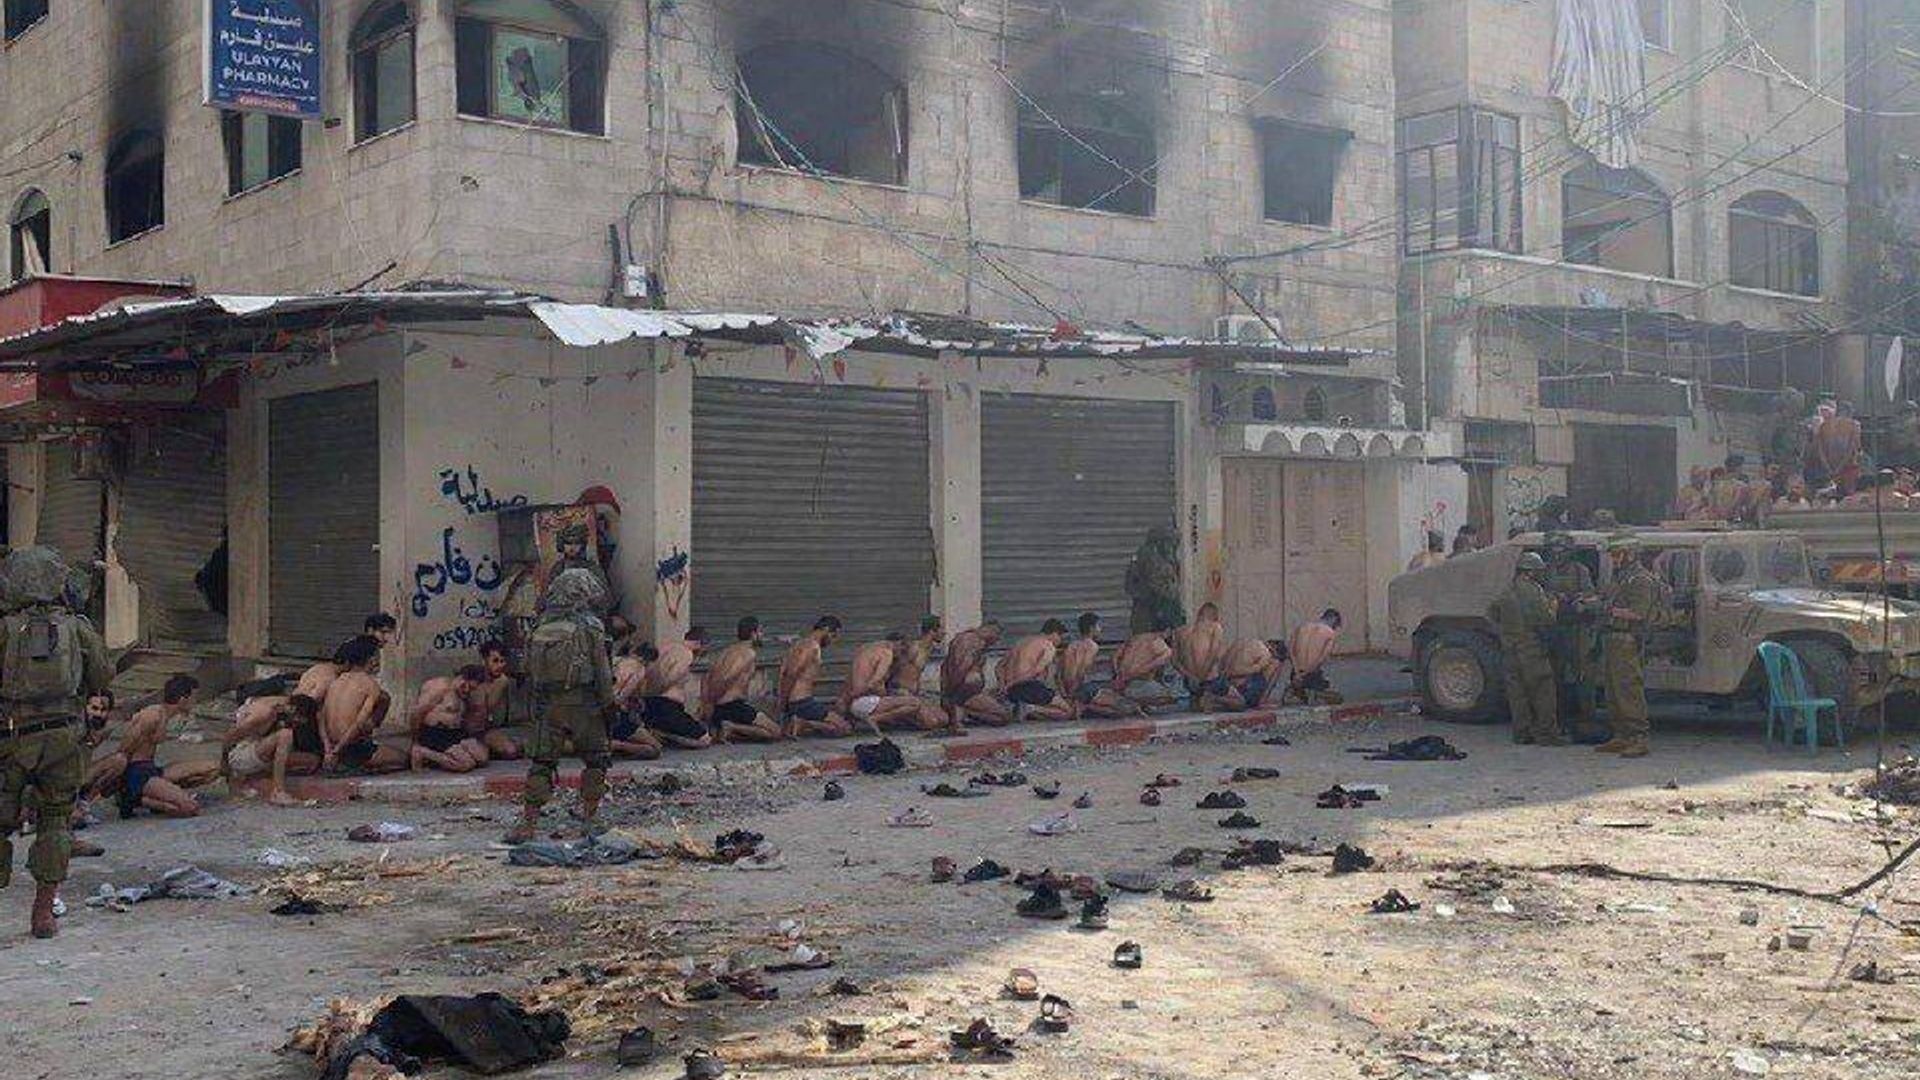 Images that allegedly show dozens of Hamas soldiers restrained wearing nothing but their underwear have ignited controversy.